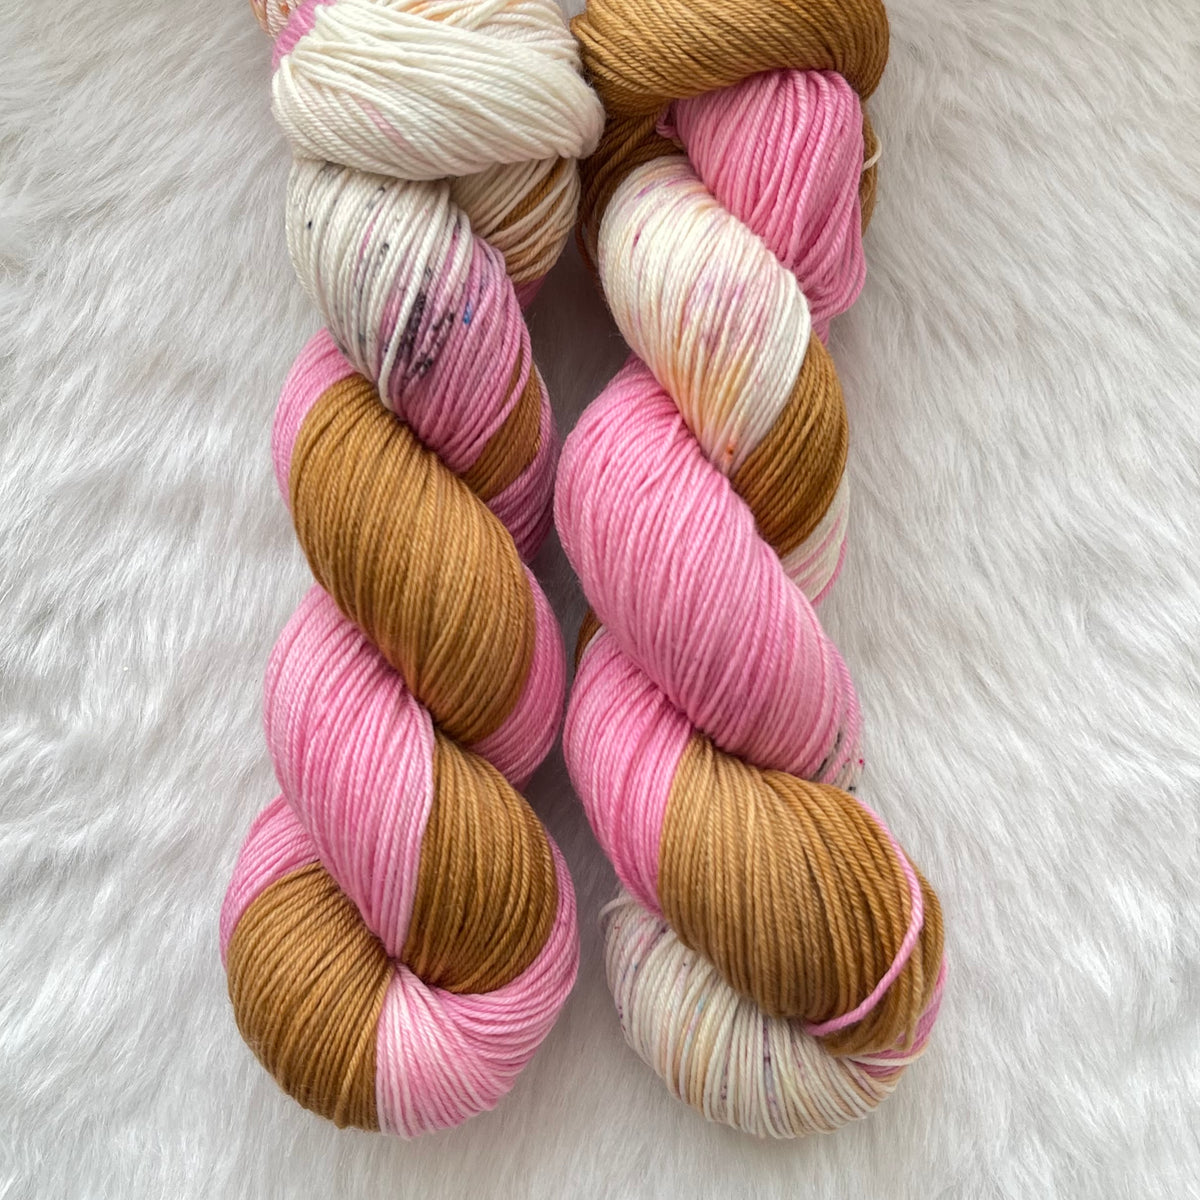 HOLIDAY CHEER  -Ready to Ship - Super Sock- Hand Dyed Yarn Skein